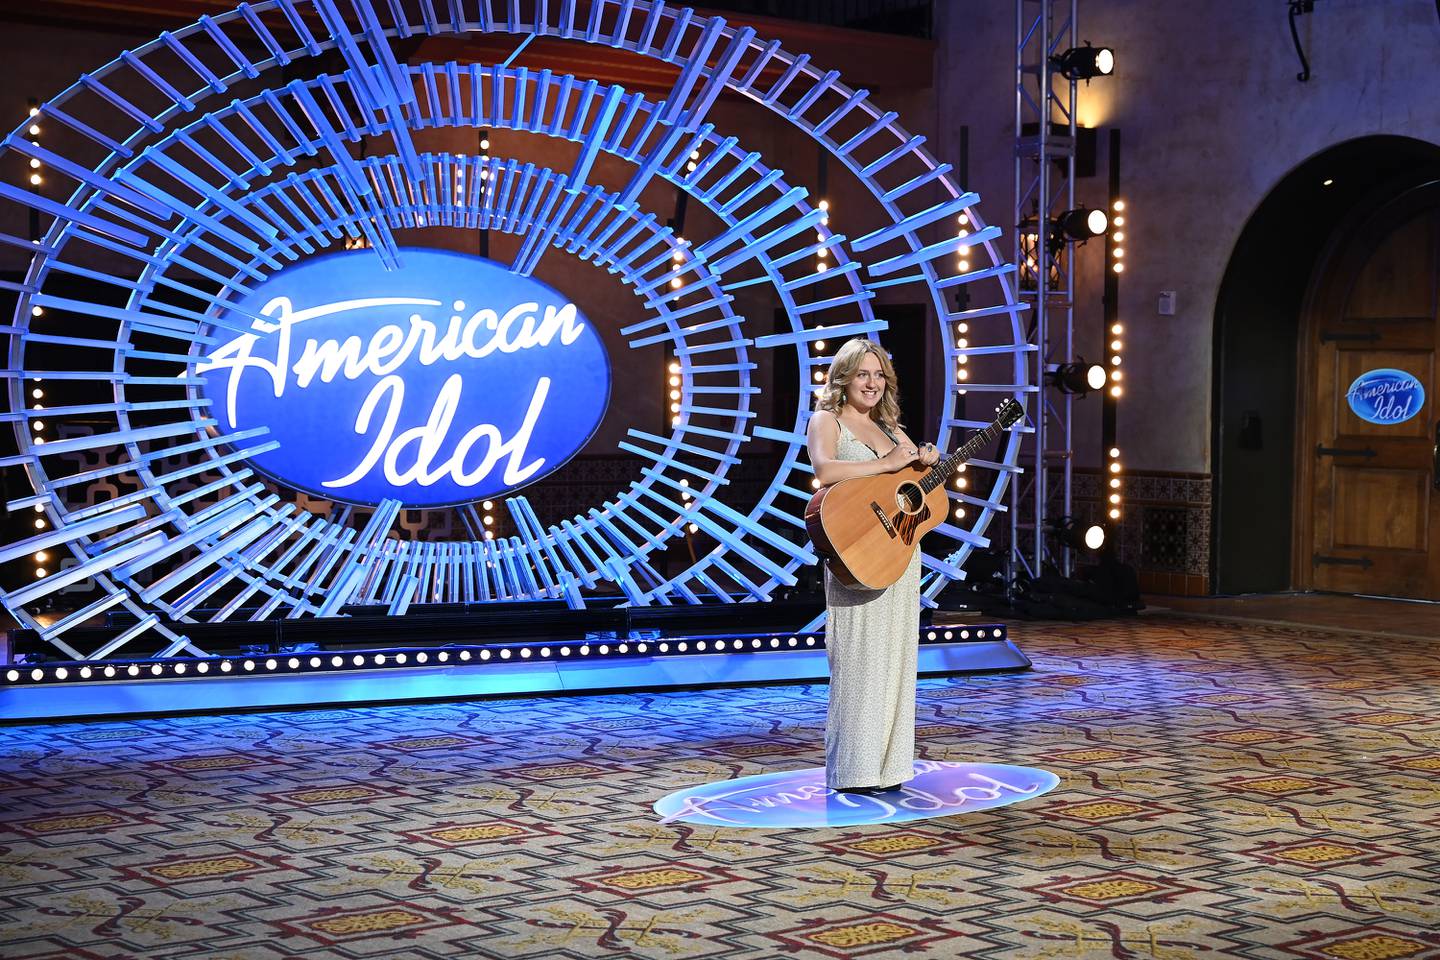 Althea Grace, a native of Algonquin, will appear on "American Idol" Sunday, March 14, the final episode of auditions.